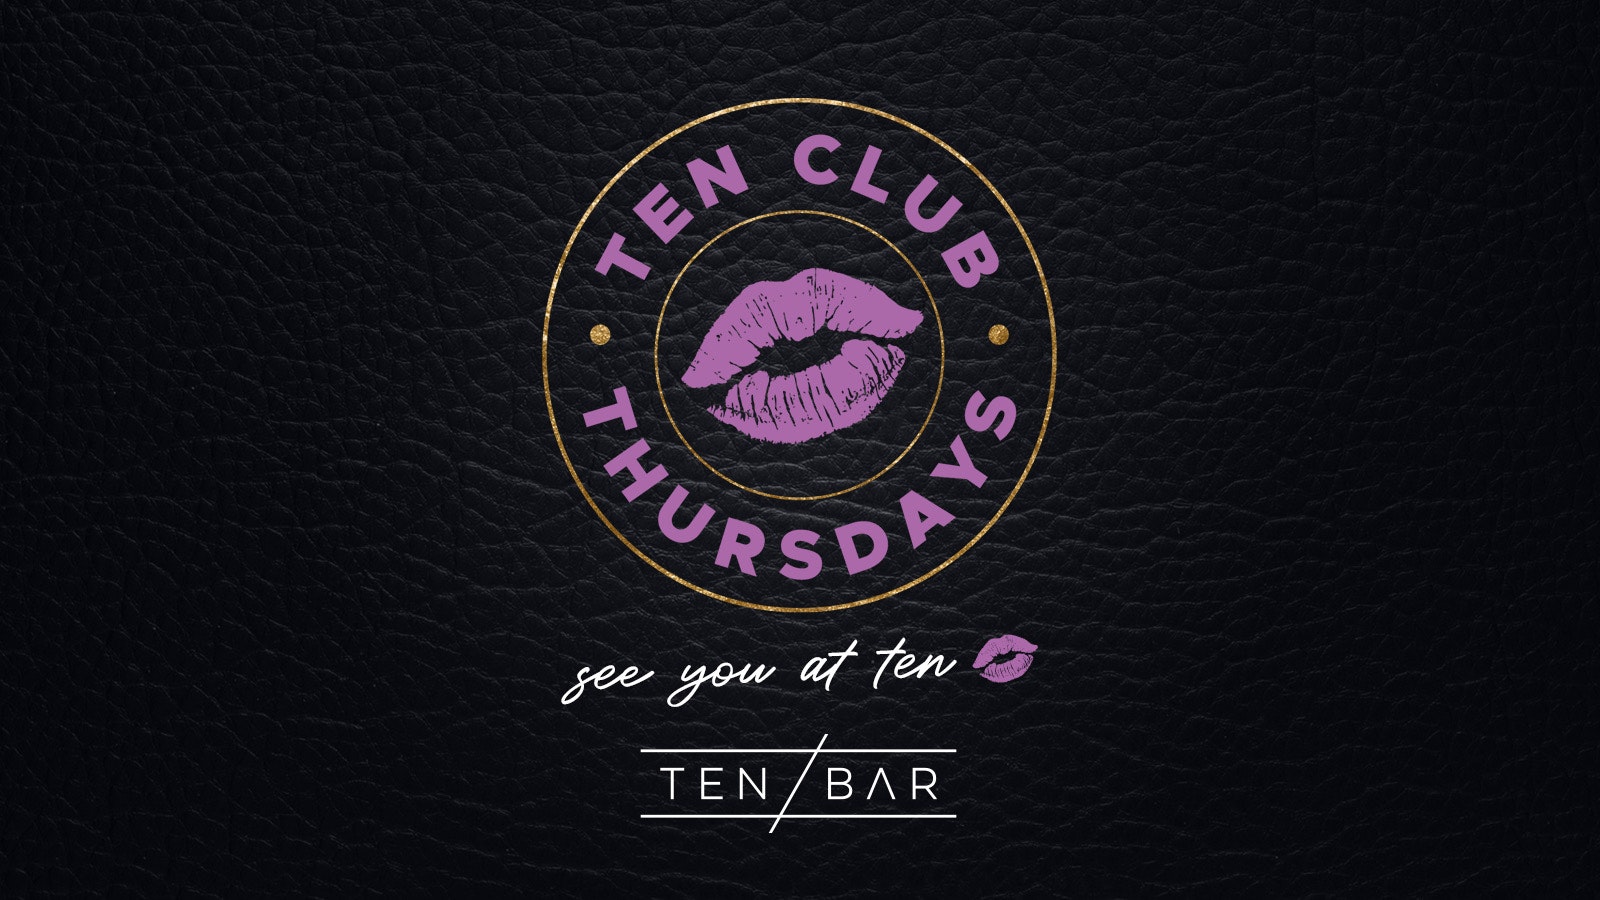 Ten Club Thursdays (Members Exclusive Drinks Deals Wristband) Free Entry all night long, Open from 10pm – 29th December